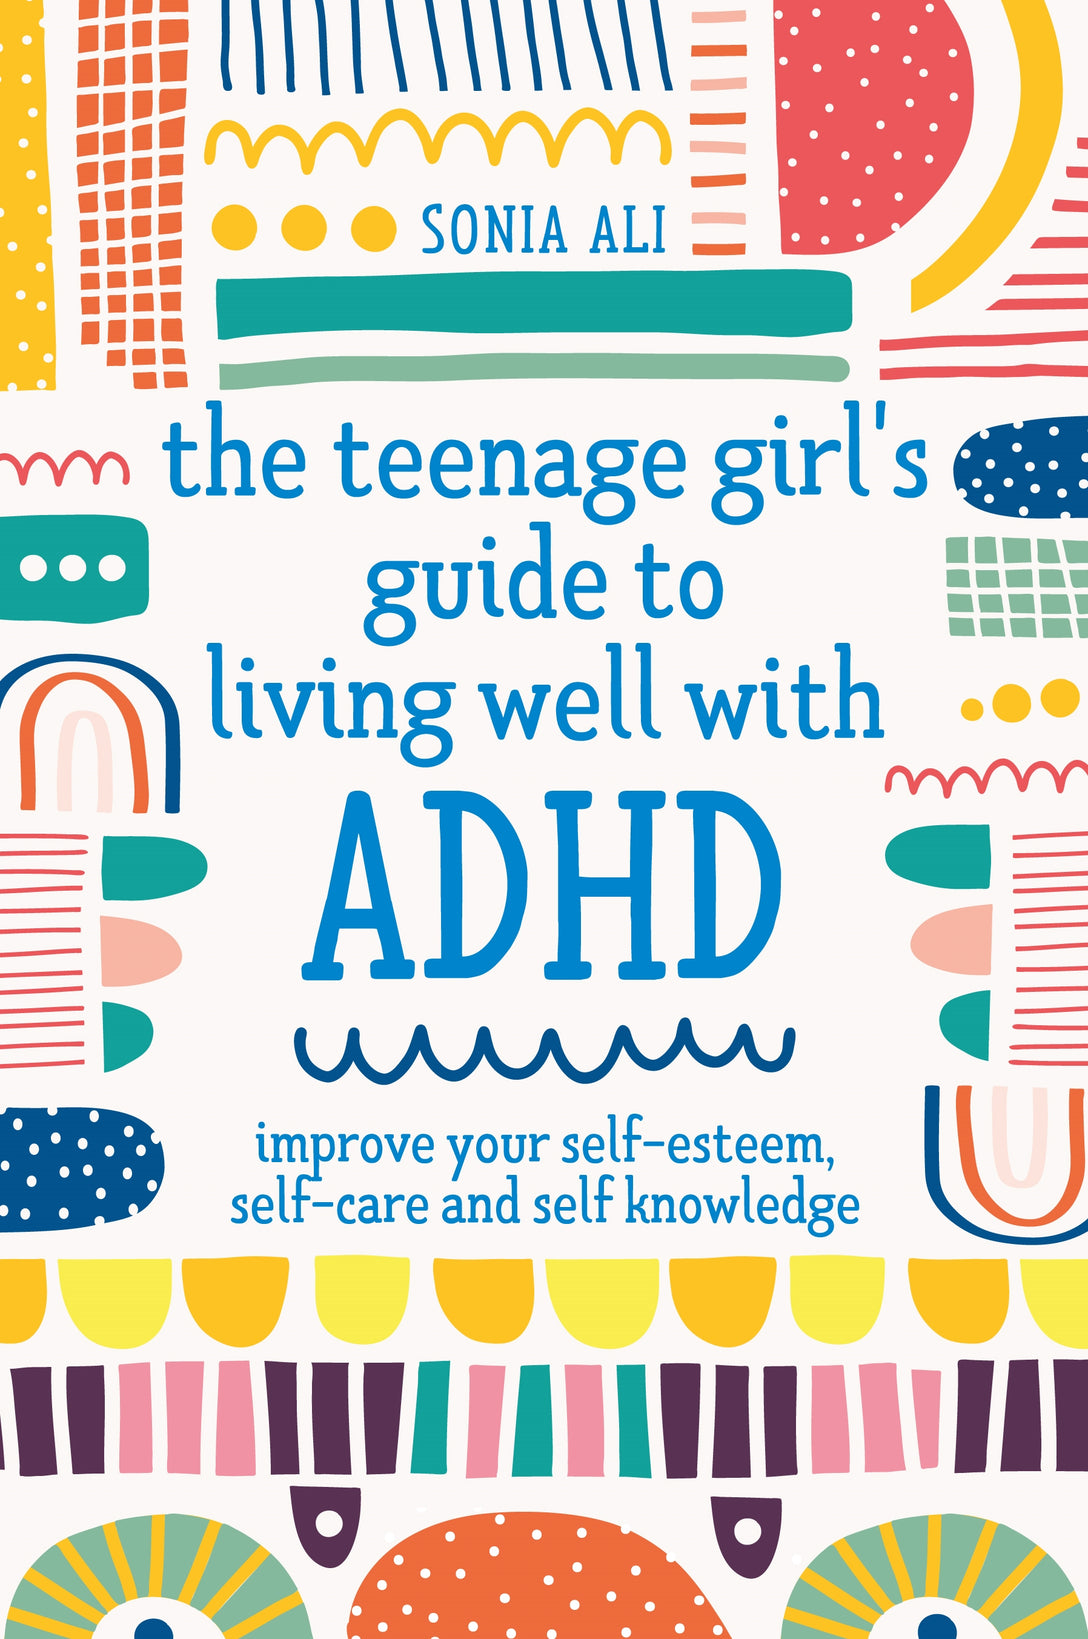 The Teenage Girl's Guide to Living Well with ADHD by Sonia Ali